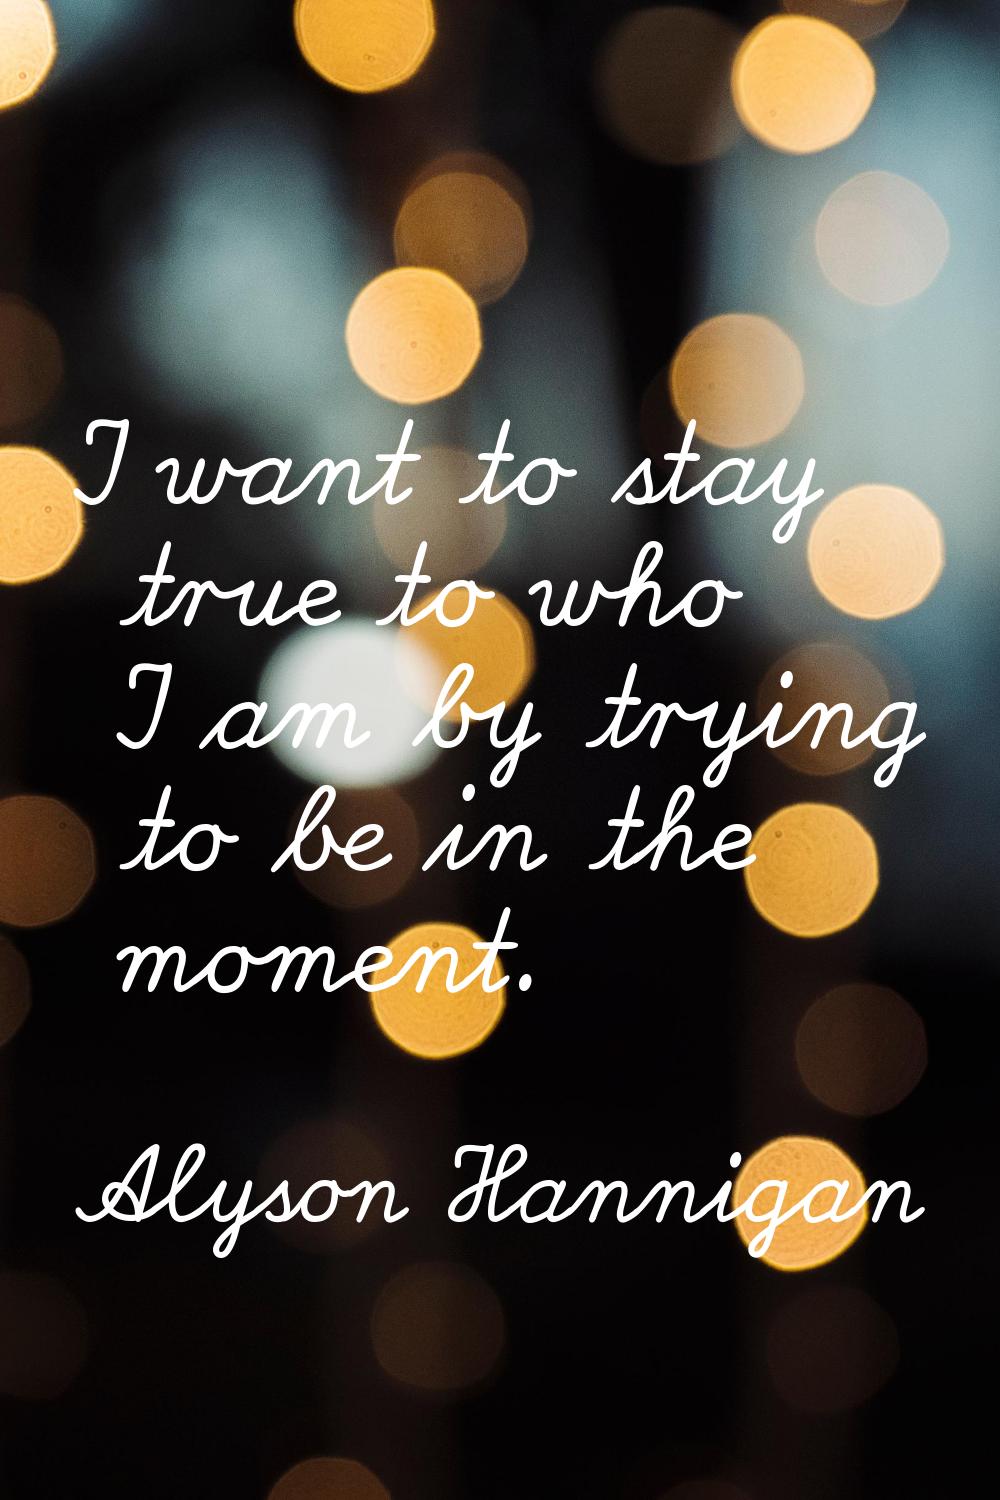 I want to stay true to who I am by trying to be in the moment.